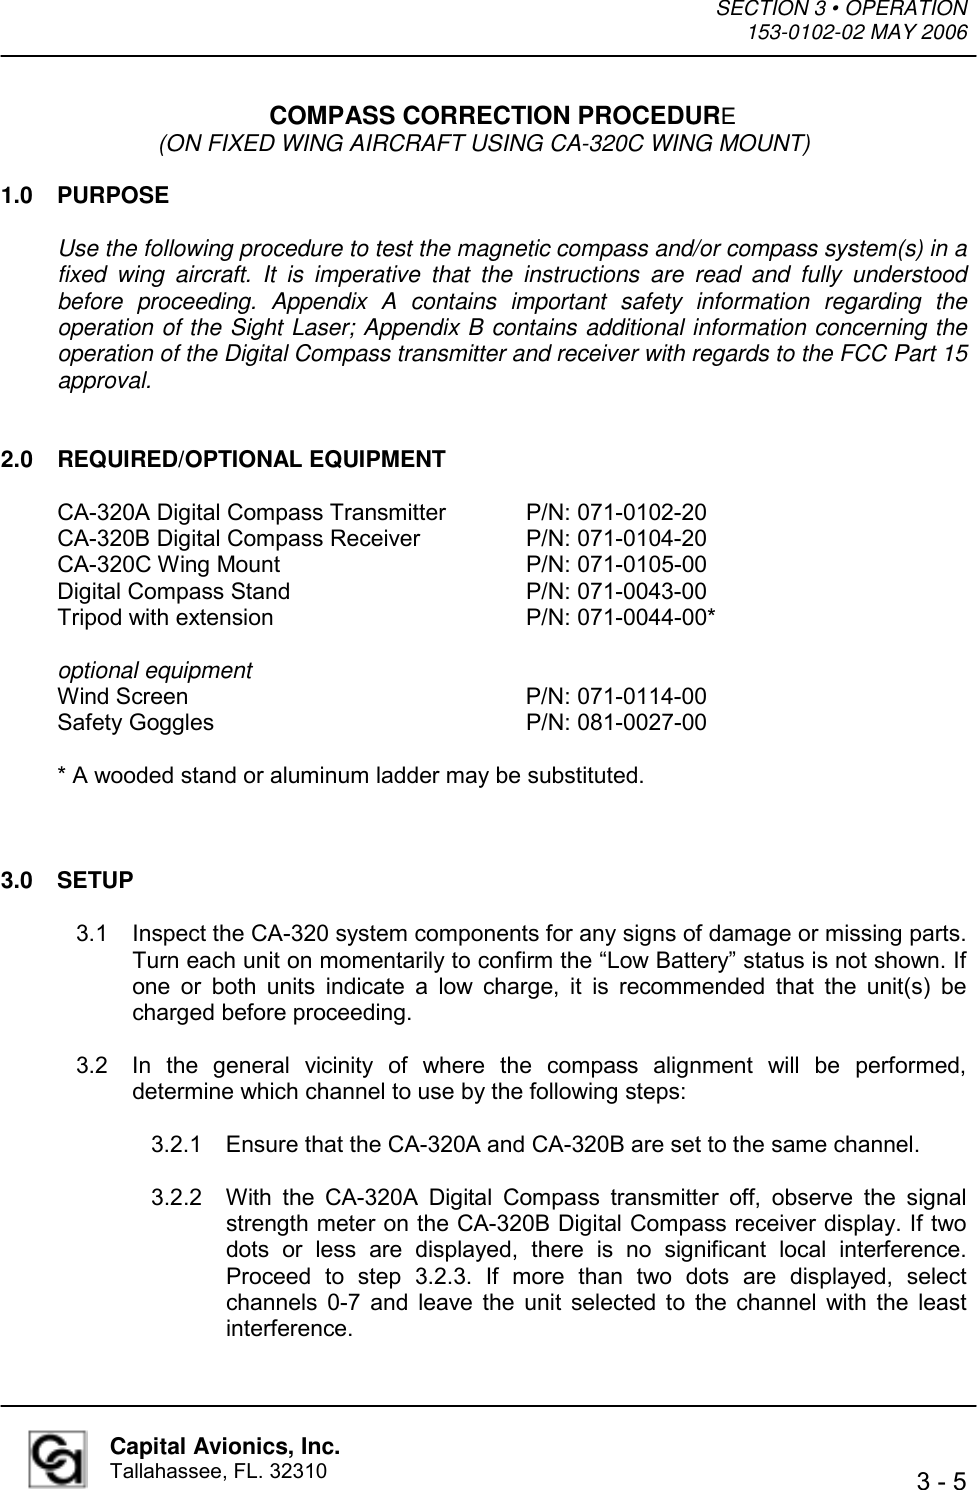 SECTION 3 • OPERATION  153-0102-02 MAY 2006   3 - 5  Capital Avionics, Inc. Tallahassee, FL. 32310 COMPASS CORRECTION PROCEDURE (ON FIXED WING AIRCRAFT USING CA-320C WING MOUNT)  1.0 PURPOSE  Use the following procedure to test the magnetic compass and/or compass system(s) in a fixed wing aircraft. It is imperative that the instructions are read and fully understood before proceeding. Appendix A contains important safety information regarding the operation of the Sight Laser; Appendix B contains additional information concerning the operation of the Digital Compass transmitter and receiver with regards to the FCC Part 15 approval.   2.0 REQUIRED/OPTIONAL EQUIPMENT  CA-320A Digital Compass Transmitter   P/N: 071-0102-20 CA-320B Digital Compass Receiver    P/N: 071-0104-20 CA-320C Wing Mount    P/N: 071-0105-00 Digital Compass Stand    P/N: 071-0043-00 Tripod with extension    P/N: 071-0044-00*  optional equipment Wind Screen     P/N: 071-0114-00 Safety Goggles     P/N: 081-0027-00  * A wooded stand or aluminum ladder may be substituted.    3.0 SETUP  3.1  Inspect the CA-320 system components for any signs of damage or missing parts. Turn each unit on momentarily to confirm the “Low Battery” status is not shown. If one or both units indicate a low charge, it is recommended that the unit(s) be charged before proceeding.  3.2  In the general vicinity of where the compass alignment will be performed, determine which channel to use by the following steps:  3.2.1  Ensure that the CA-320A and CA-320B are set to the same channel.  3.2.2  With the CA-320A Digital Compass transmitter off, observe the signal strength meter on the CA-320B Digital Compass receiver display. If two dots or less are displayed, there is no significant local interference. Proceed to step 3.2.3. If more than two dots are displayed, select channels 0-7 and leave the unit selected to the channel with the least interference. 